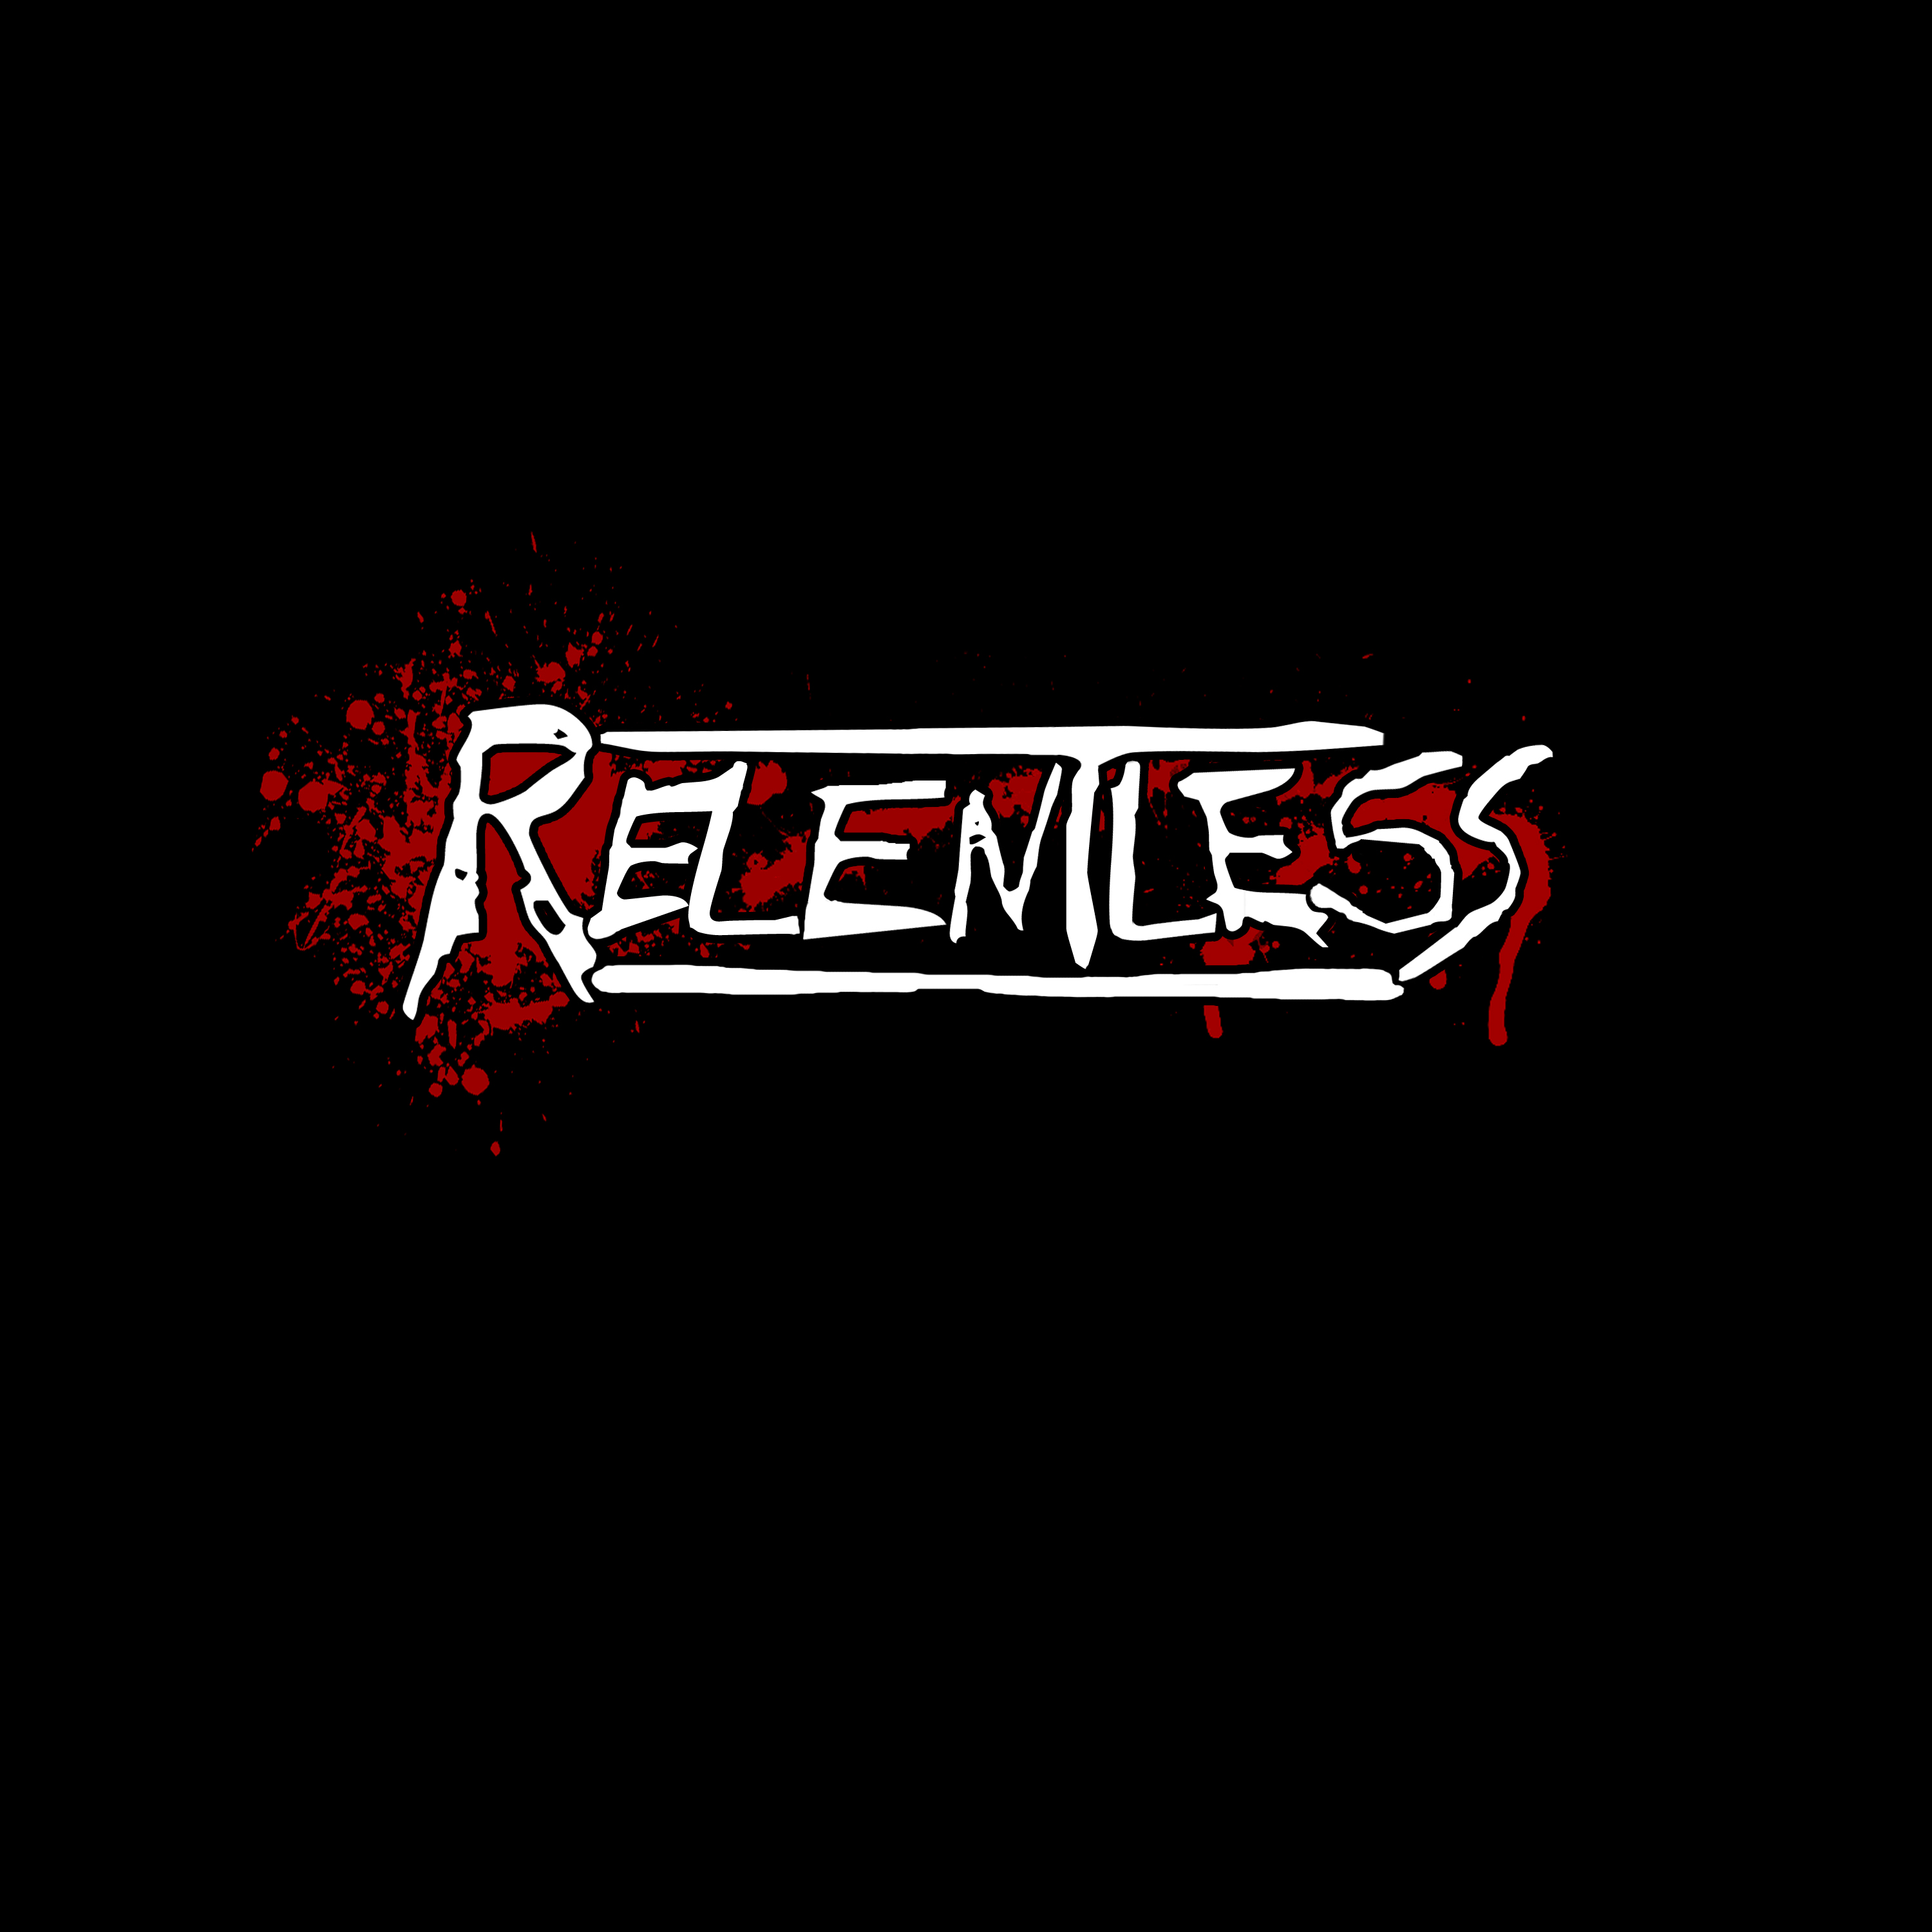 Relentless Logo Music Bands High Quality Image HD Wallpaper Of